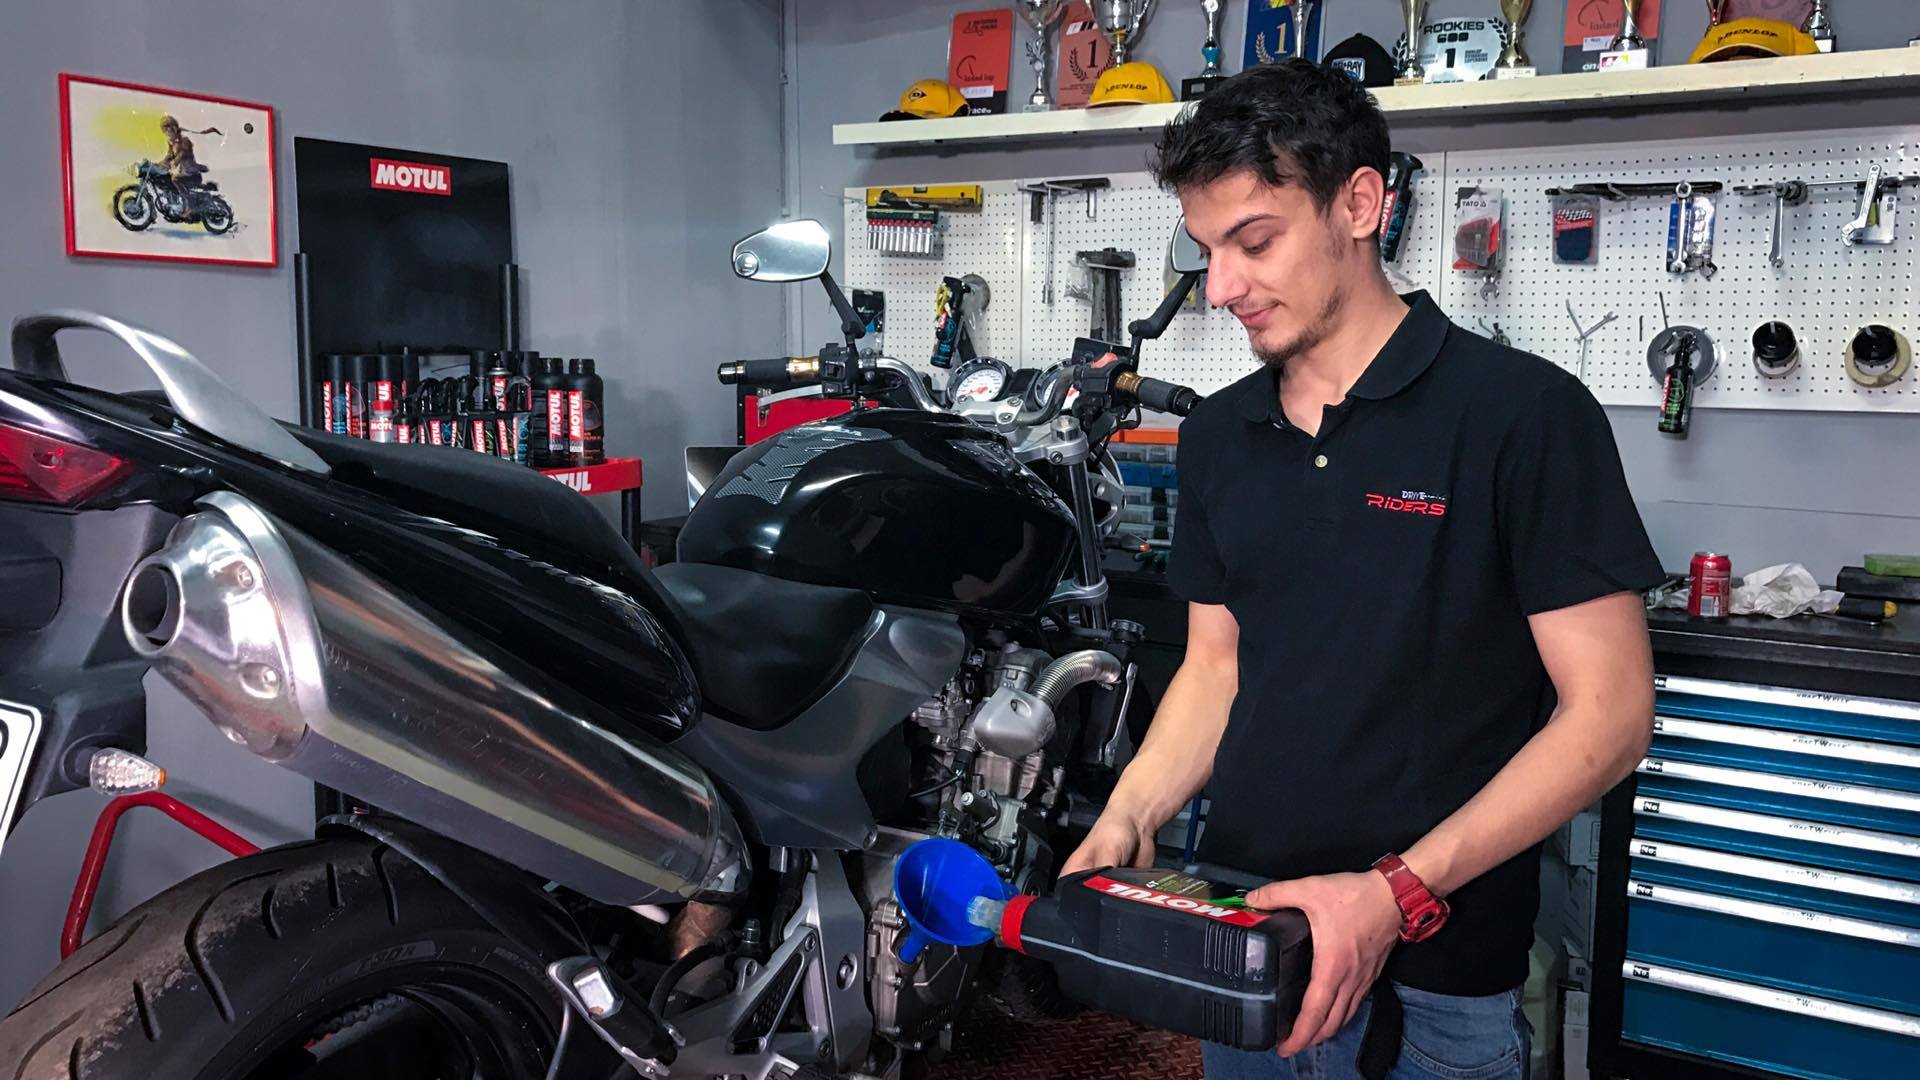 Motorcycle Oil Change - Video Guide | DriveMag Riders